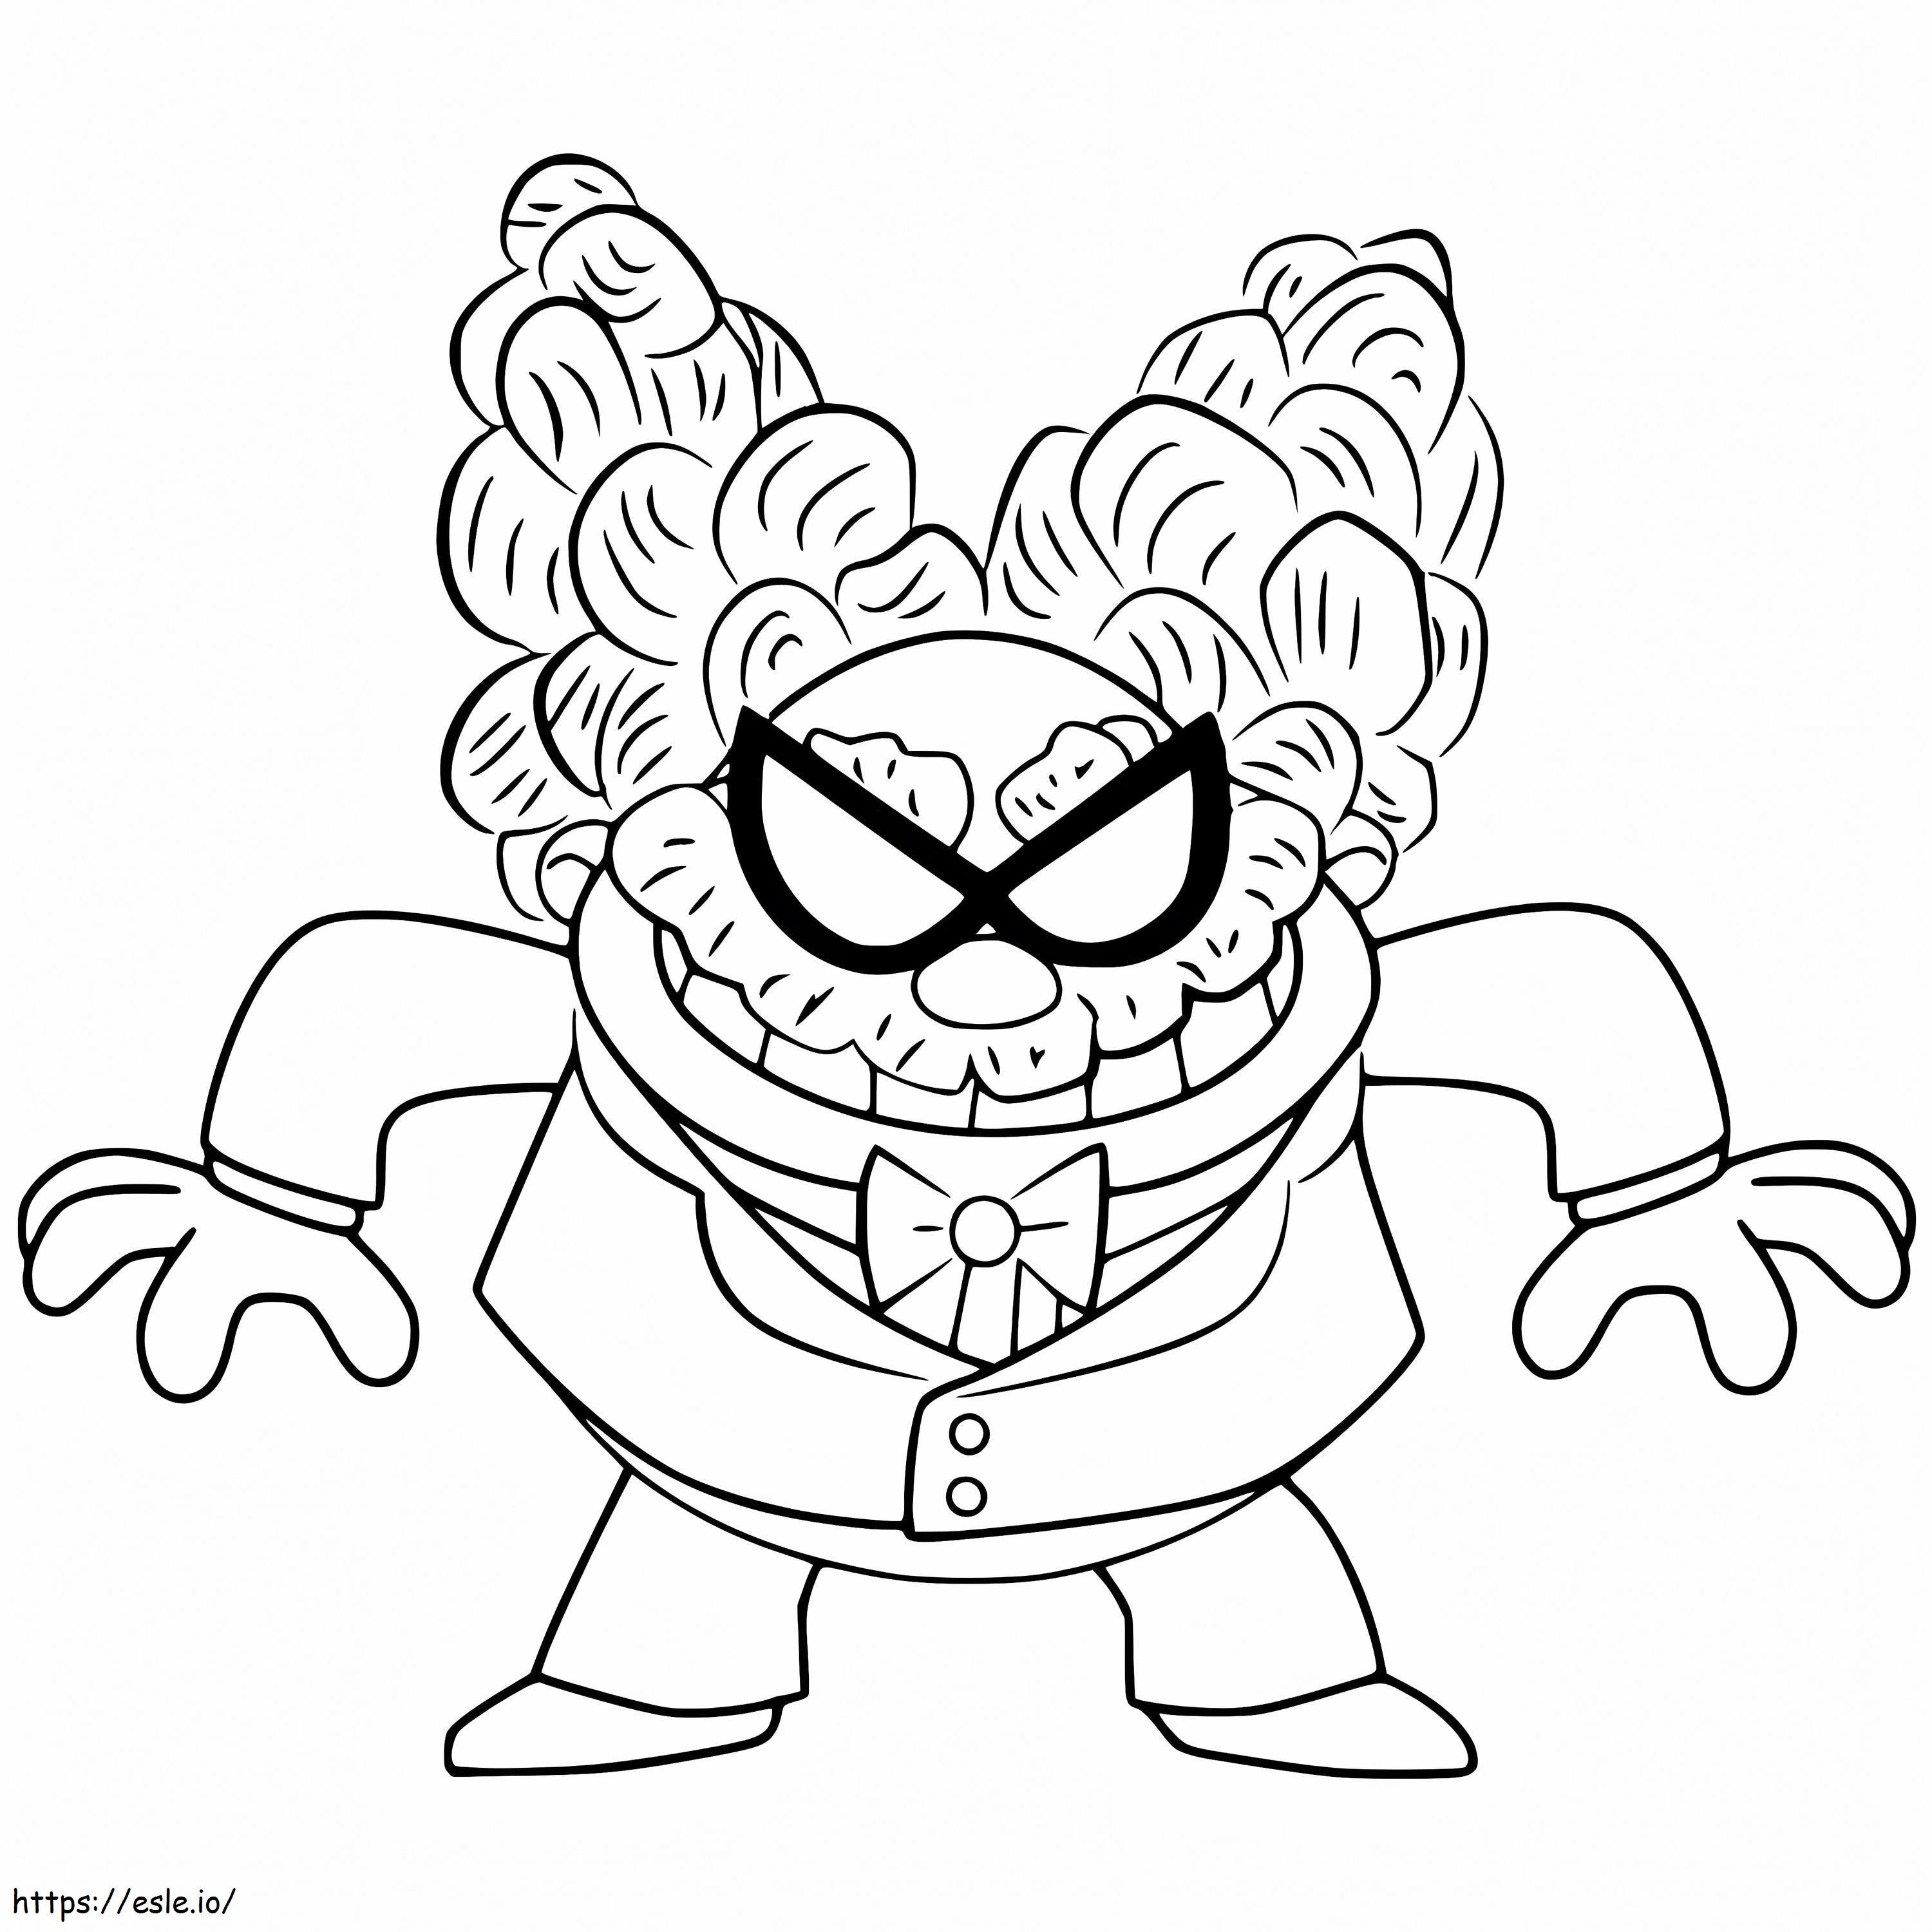 1575603321 Evil Professor Pippy P Poopypants Www Getcoloringpages Com coloring page